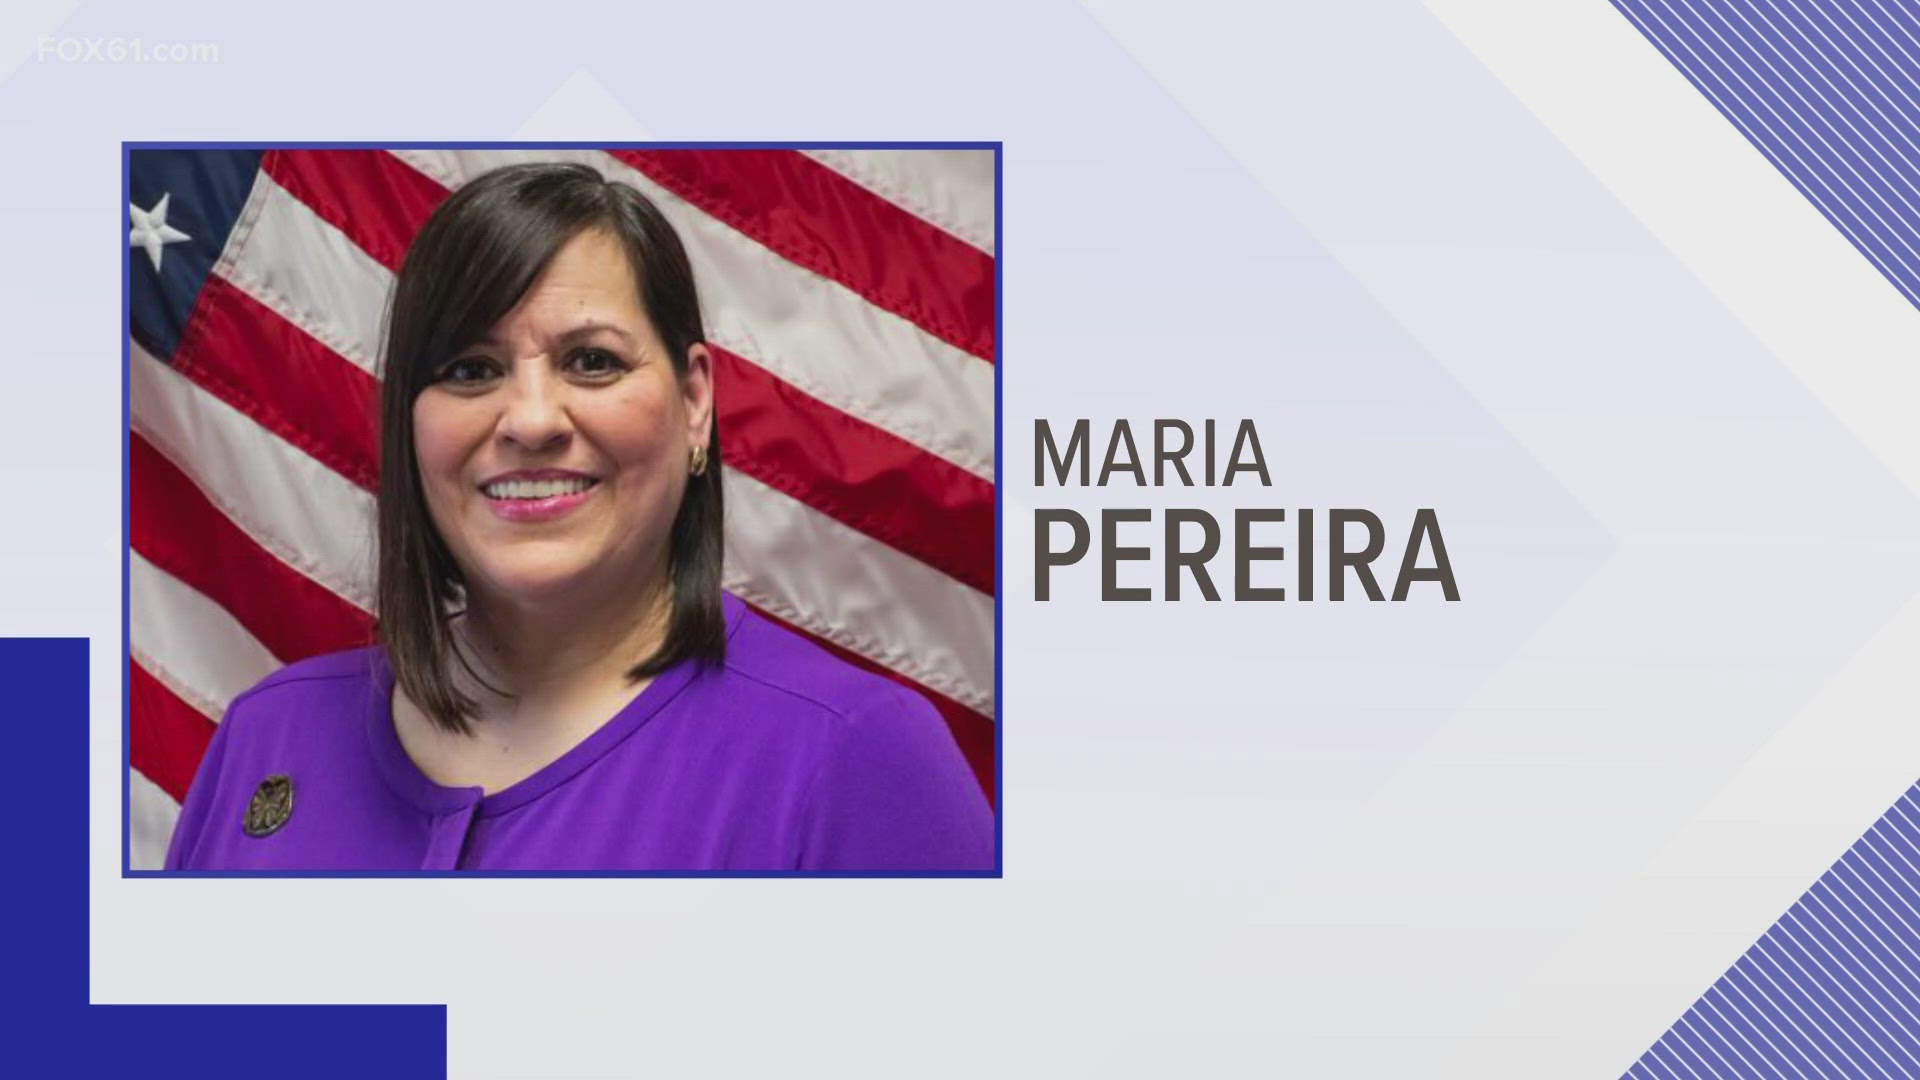 Another bombshell development in the Bridgeport ballot fraud scandal. Maria Pereira is the third Bridgeport City Councilor to be suspected of ballot fraud.